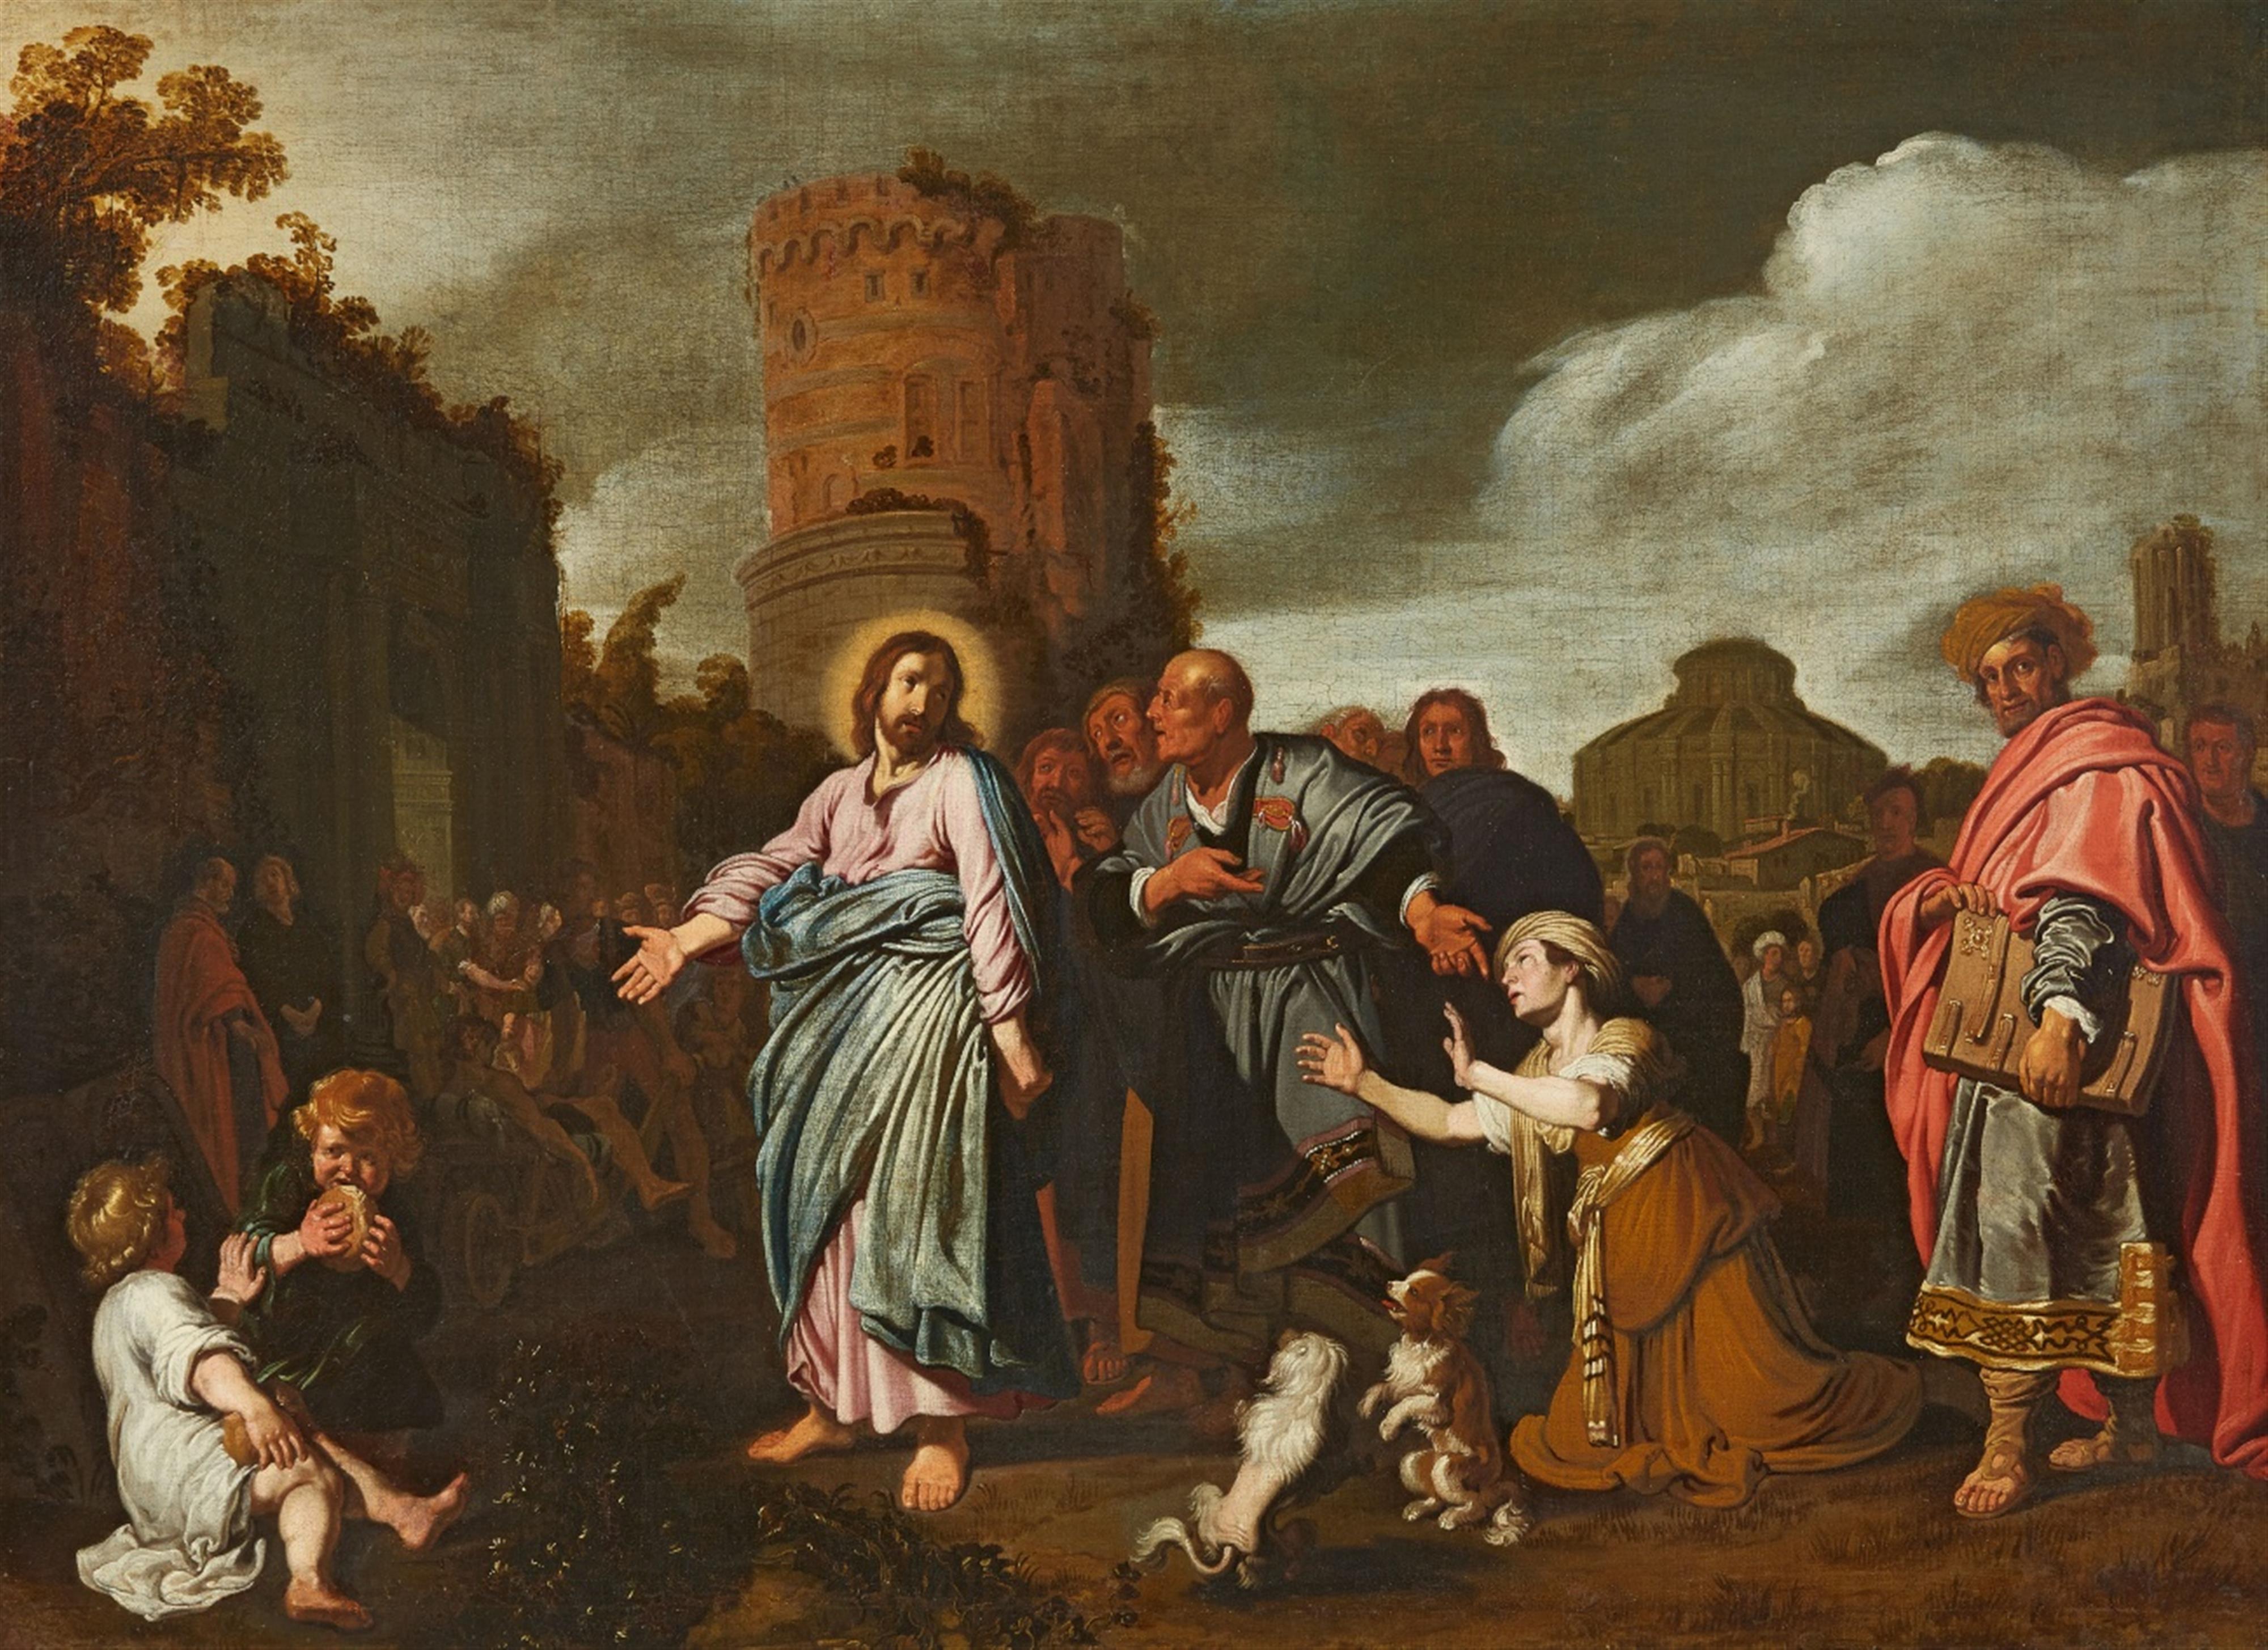 Pieter Lastman, attributed to - Jesus and the Woman Taken in Adultery - image-1